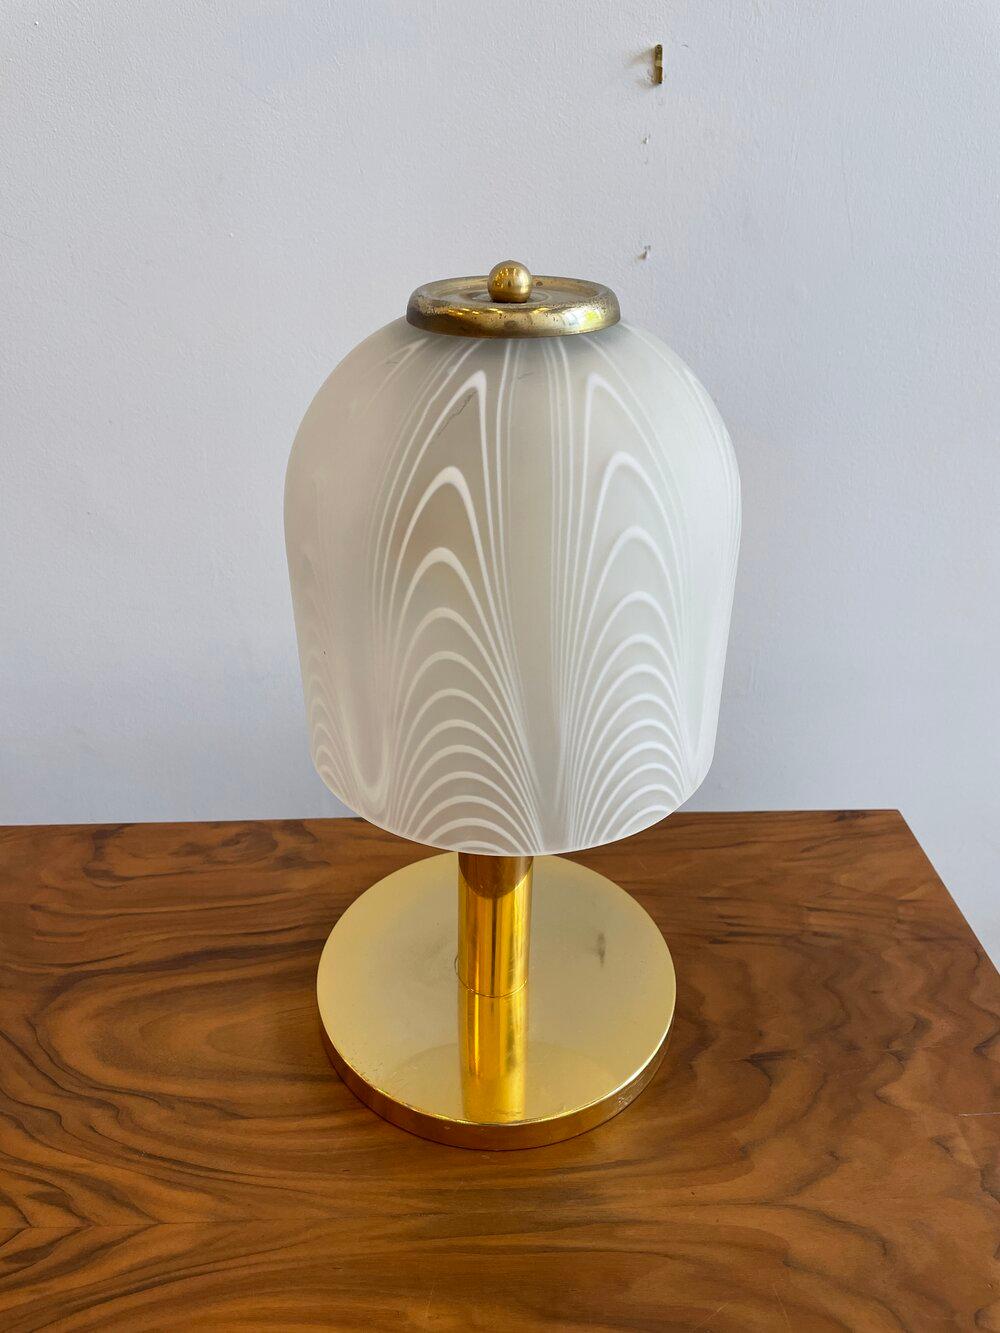 Italian Deco table lamp with feathered glass detail. (Shade: 7.5” D x 7.75” H).
   